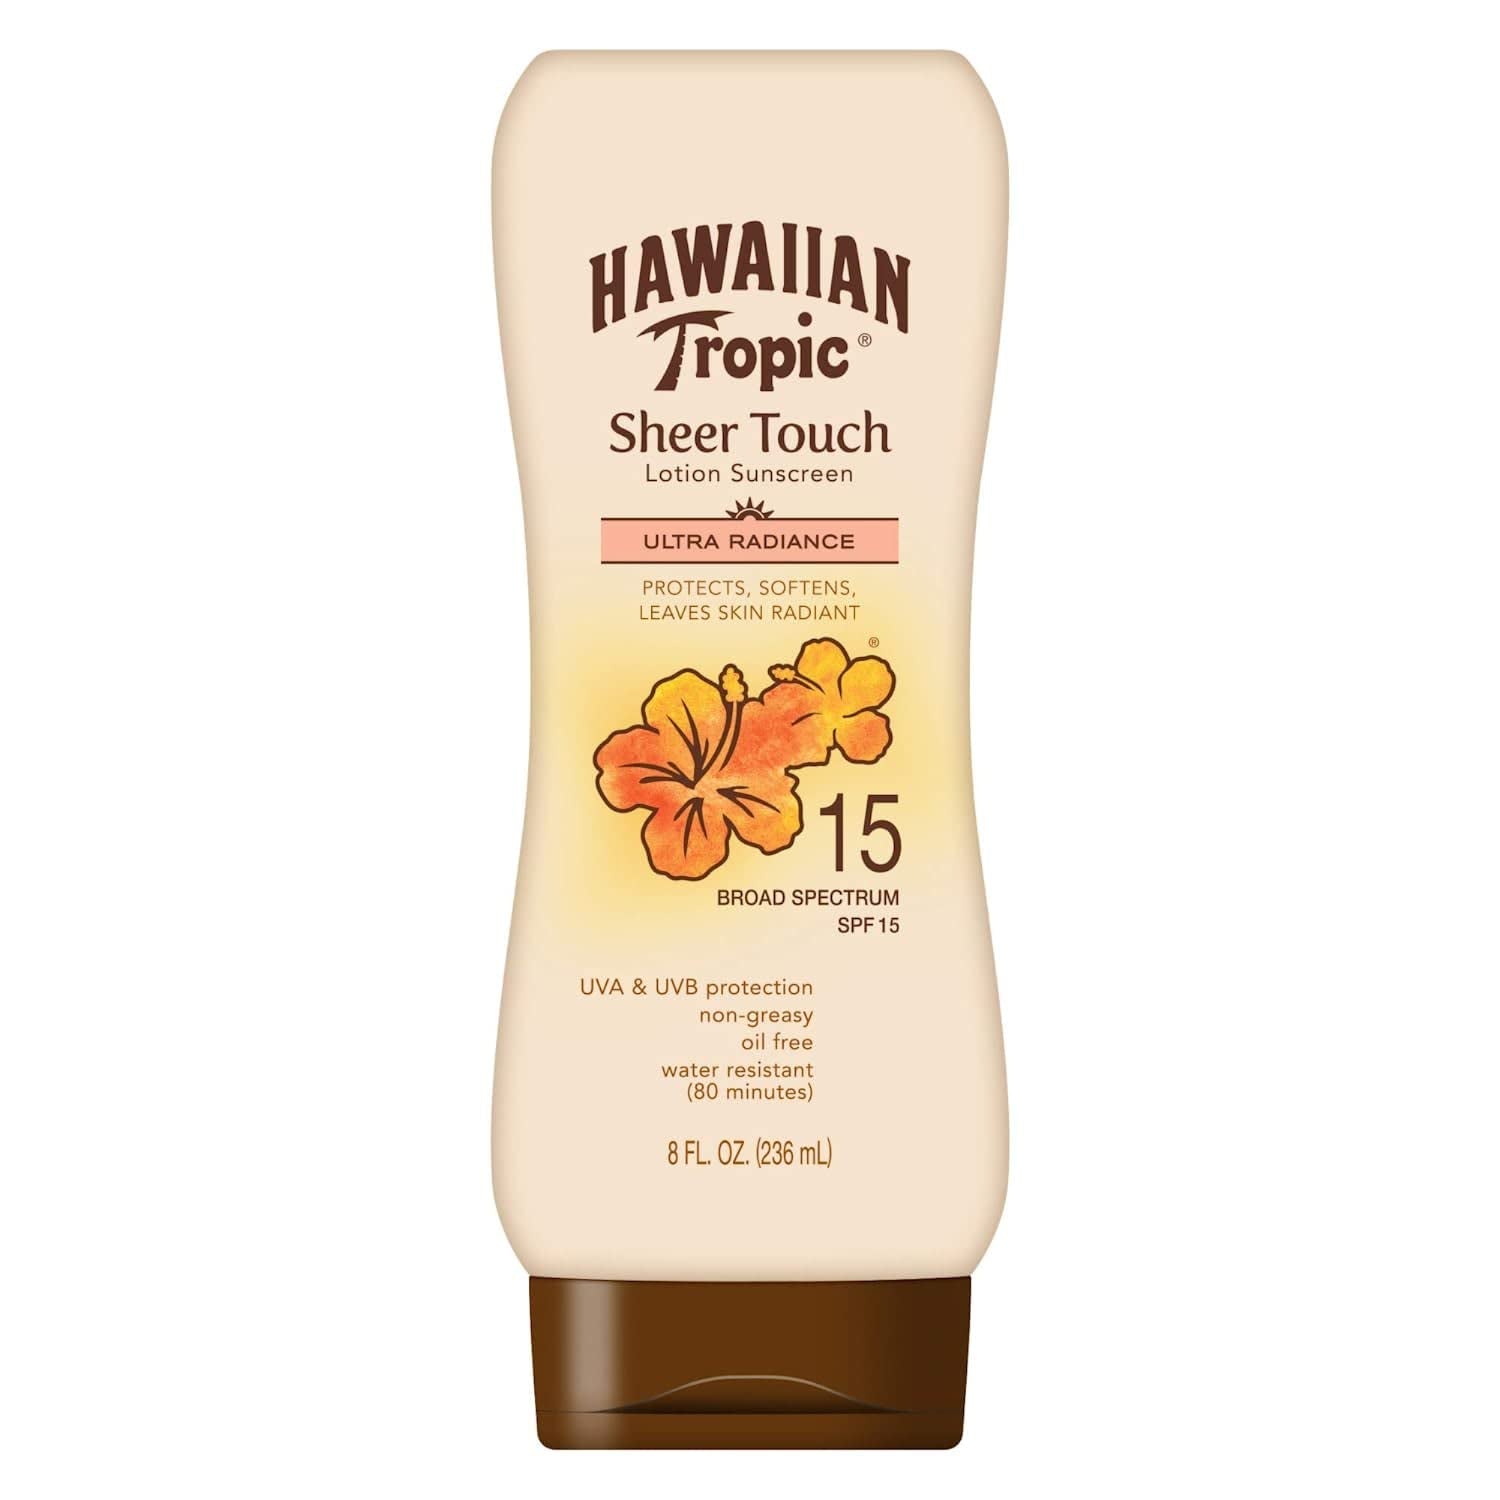 "Radiant Protection: Hawaiian Tropic Sheer Touch Ultra Radiance Lotion Sunscreen SPF 50 Twin Pack"